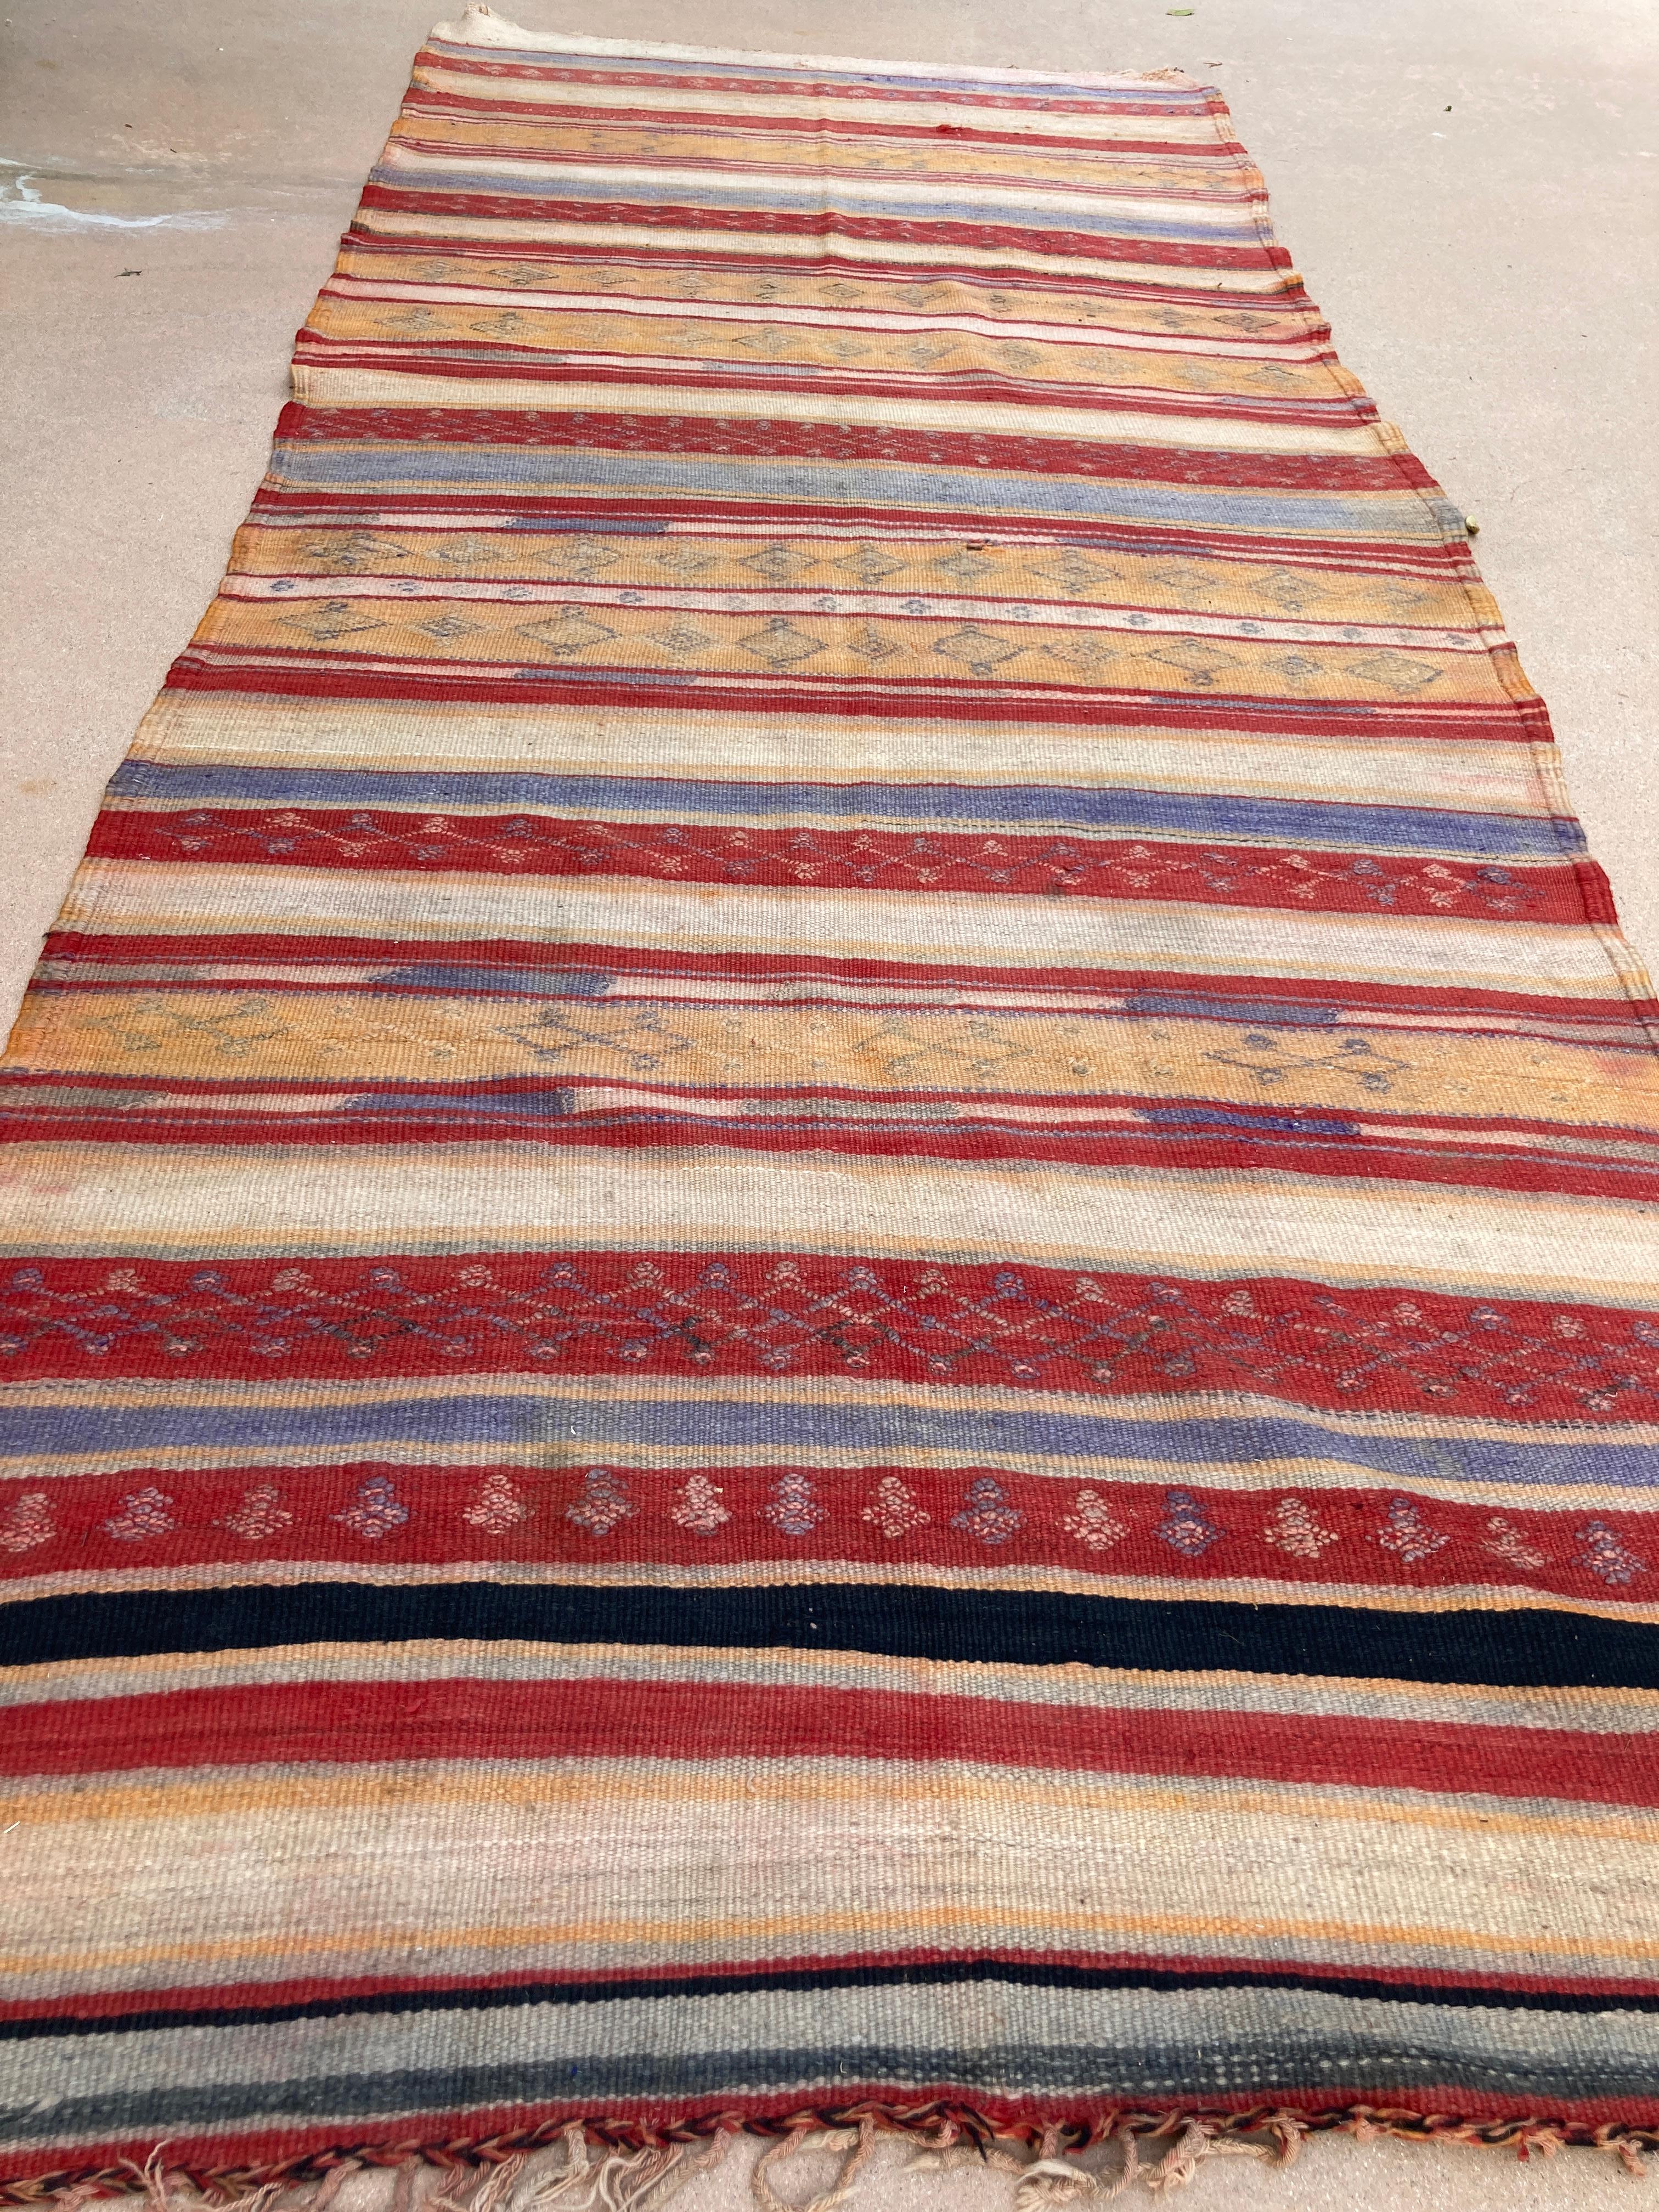 1960s Moroccan Rug Ethnic Flat Hand-woven Kilim  In Fair Condition For Sale In North Hollywood, CA